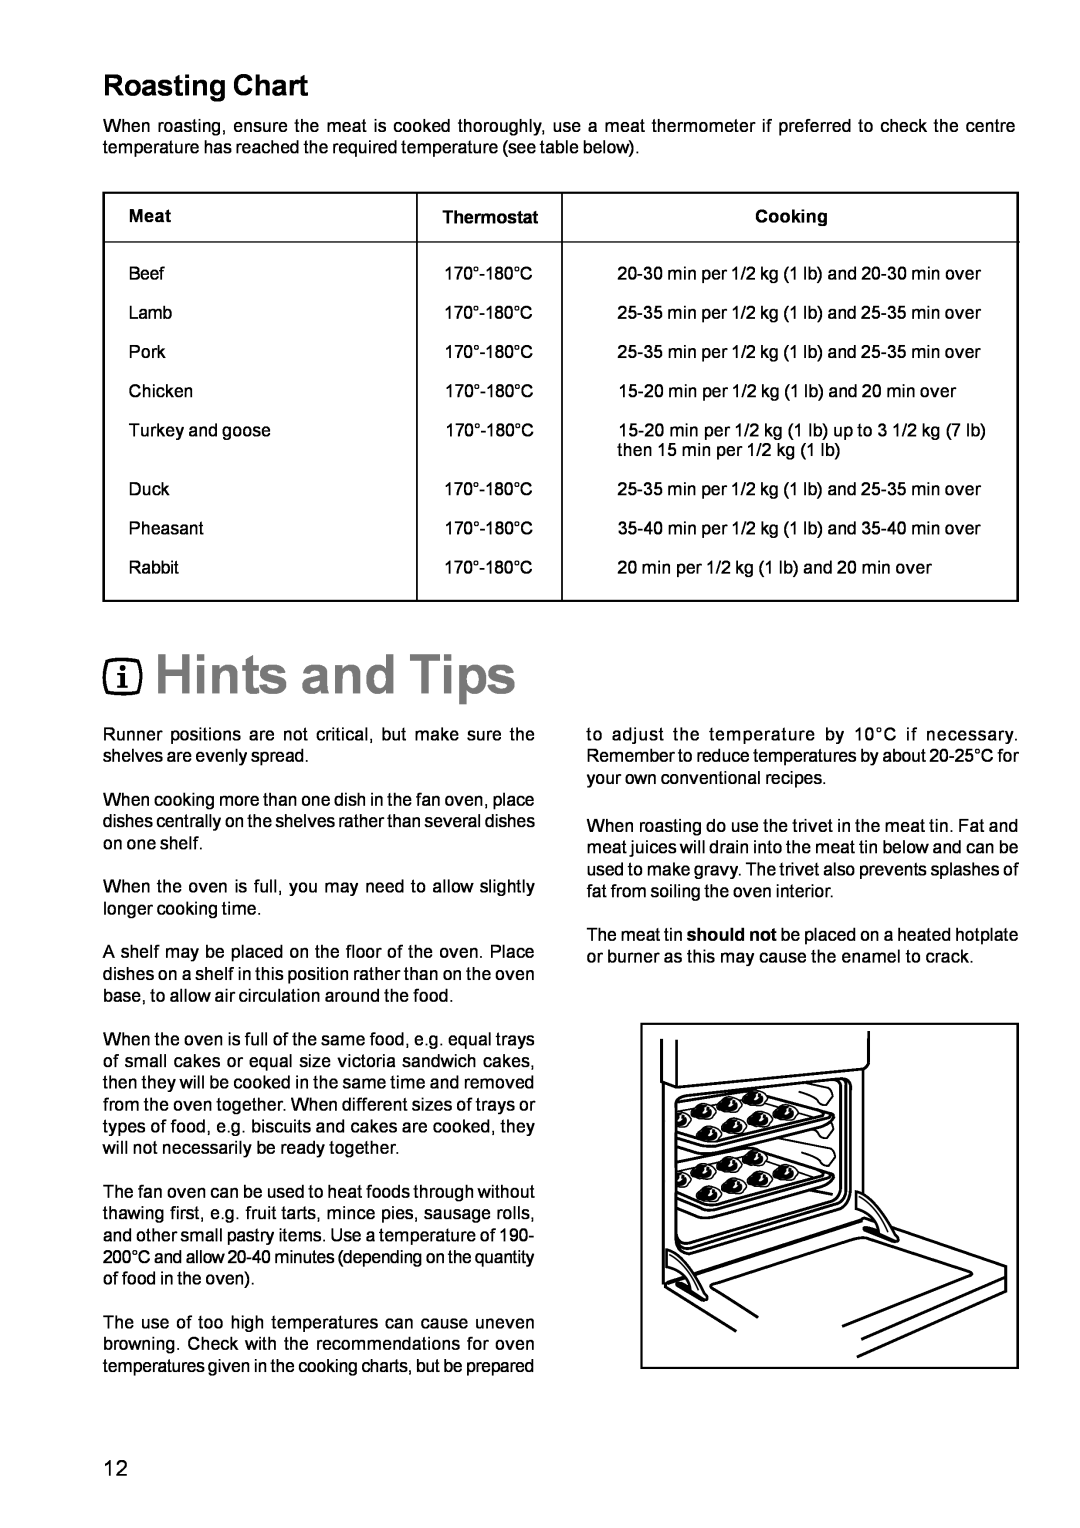 Zanussi ZCM 610, ZCM 600 manual Hints and Tips, Roasting Chart 